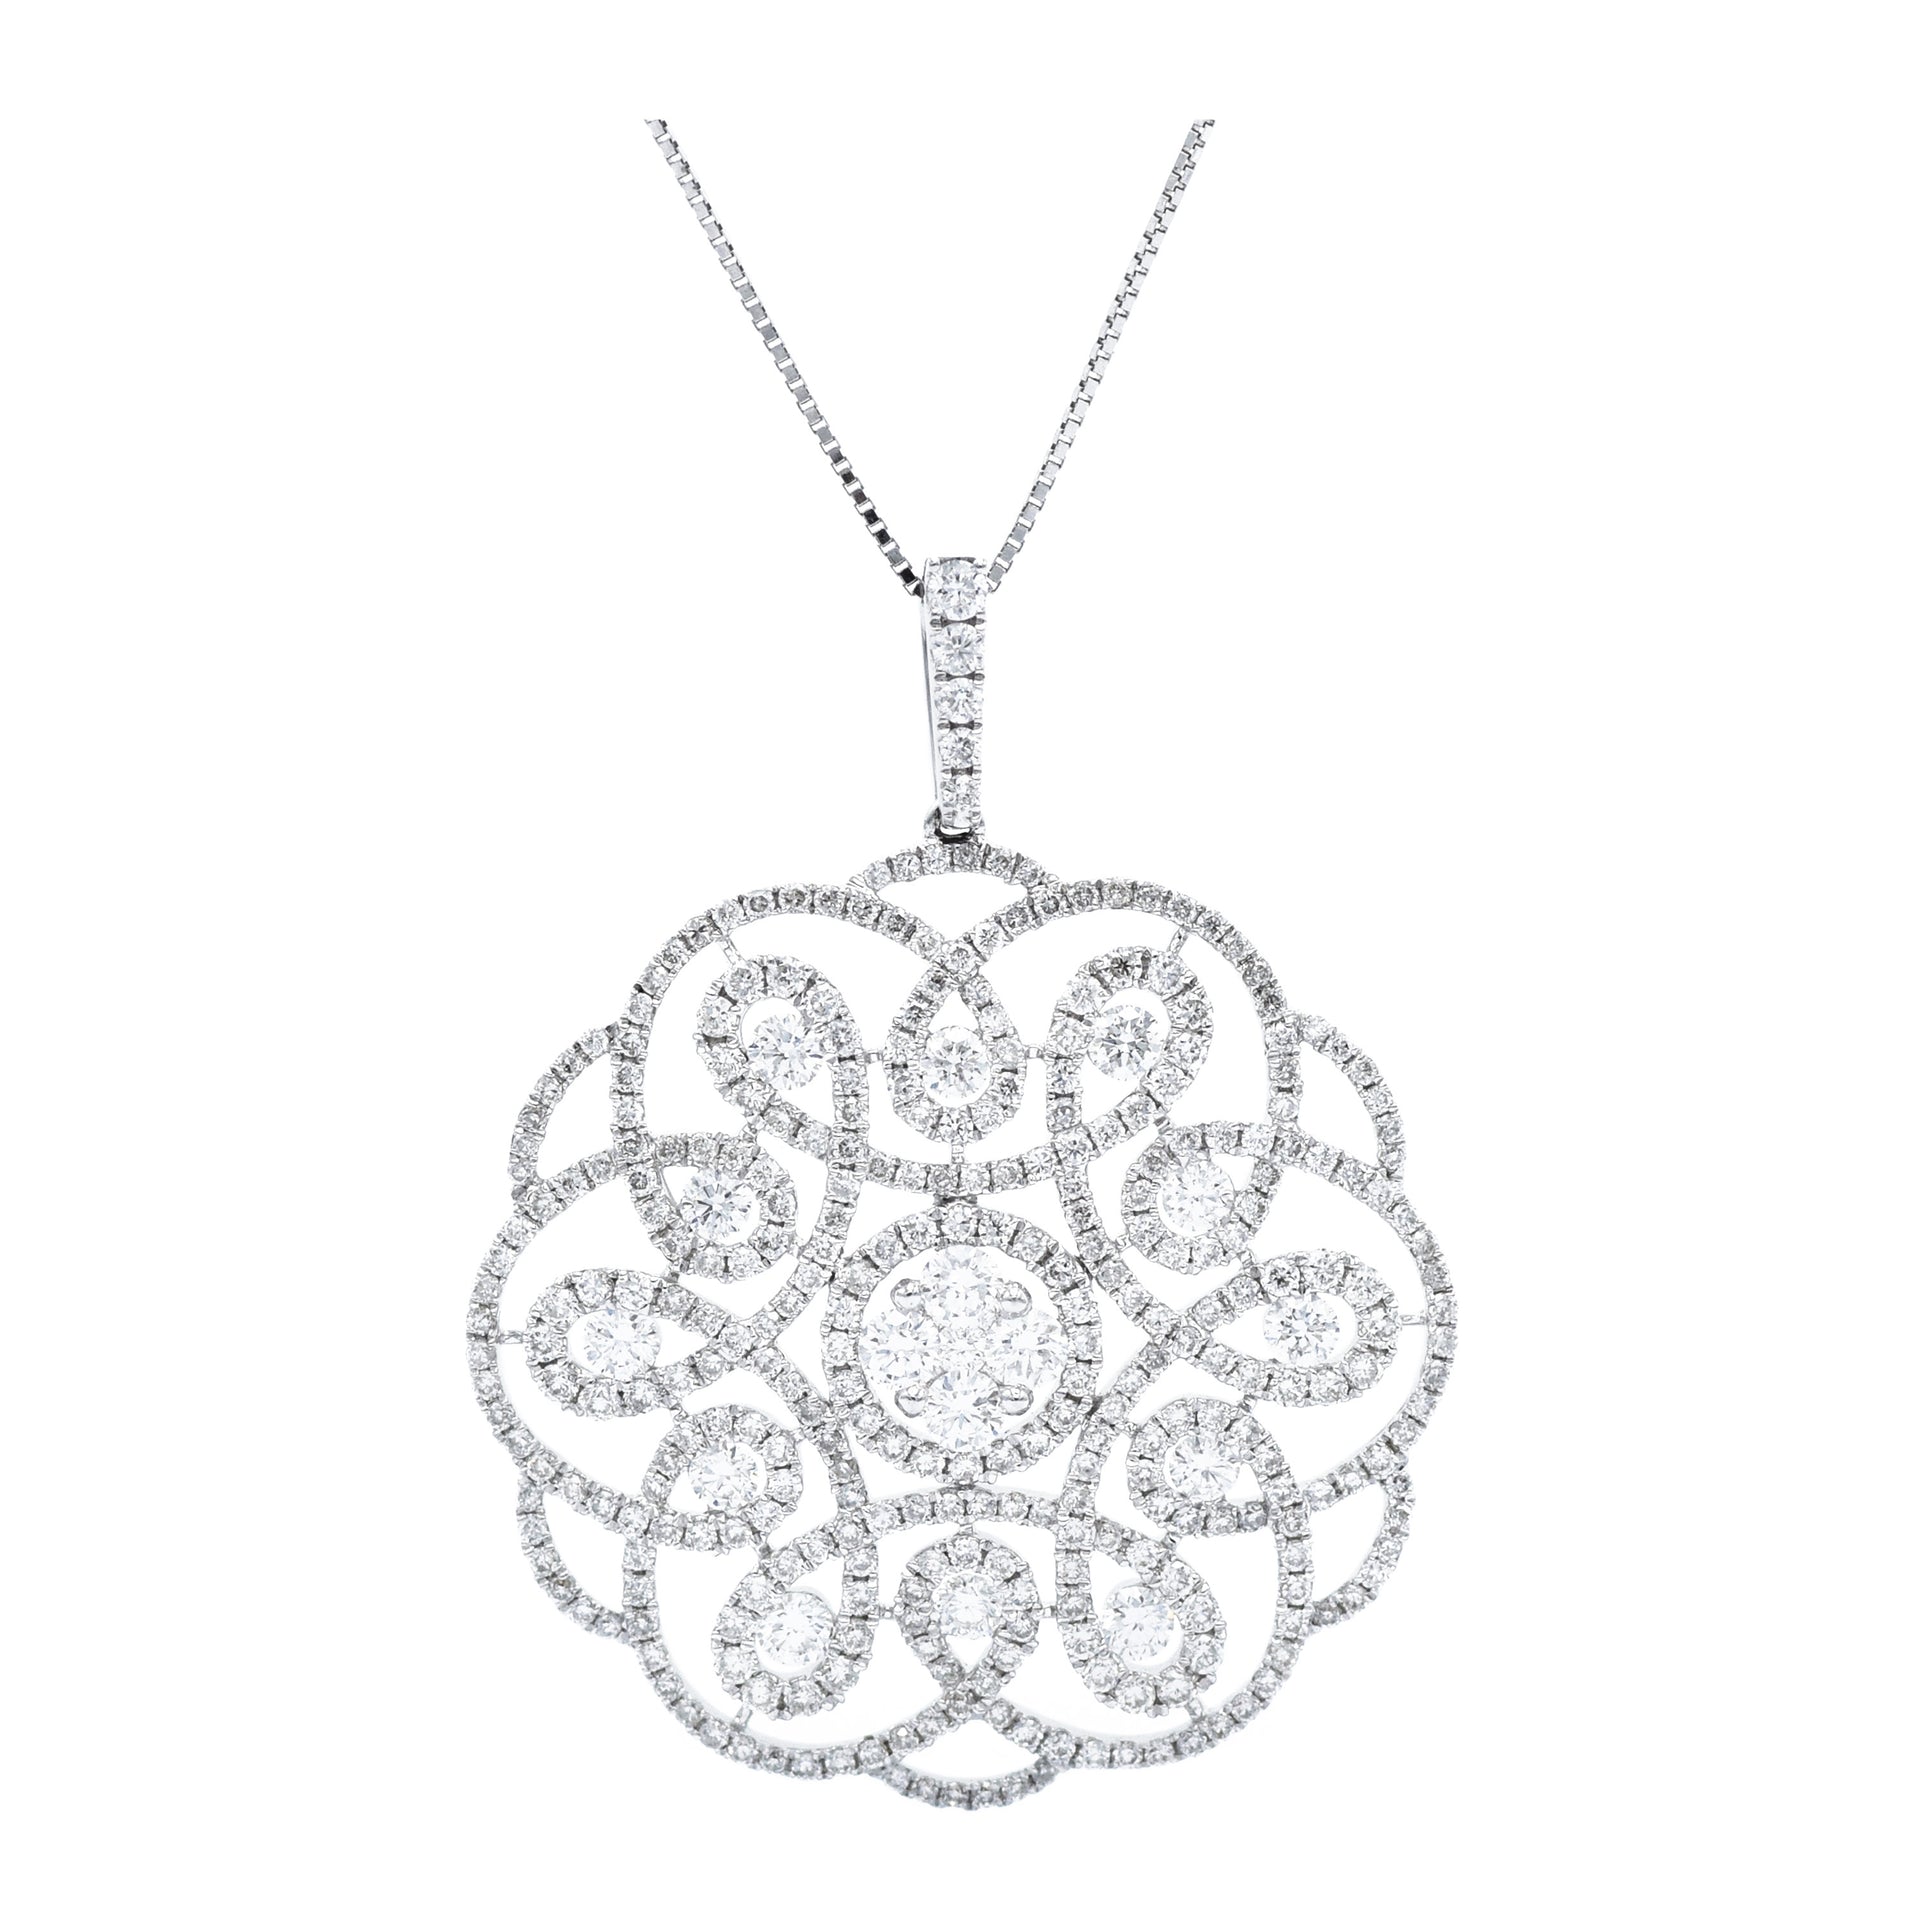 18kt White Gold and Diamond Floral Pendant